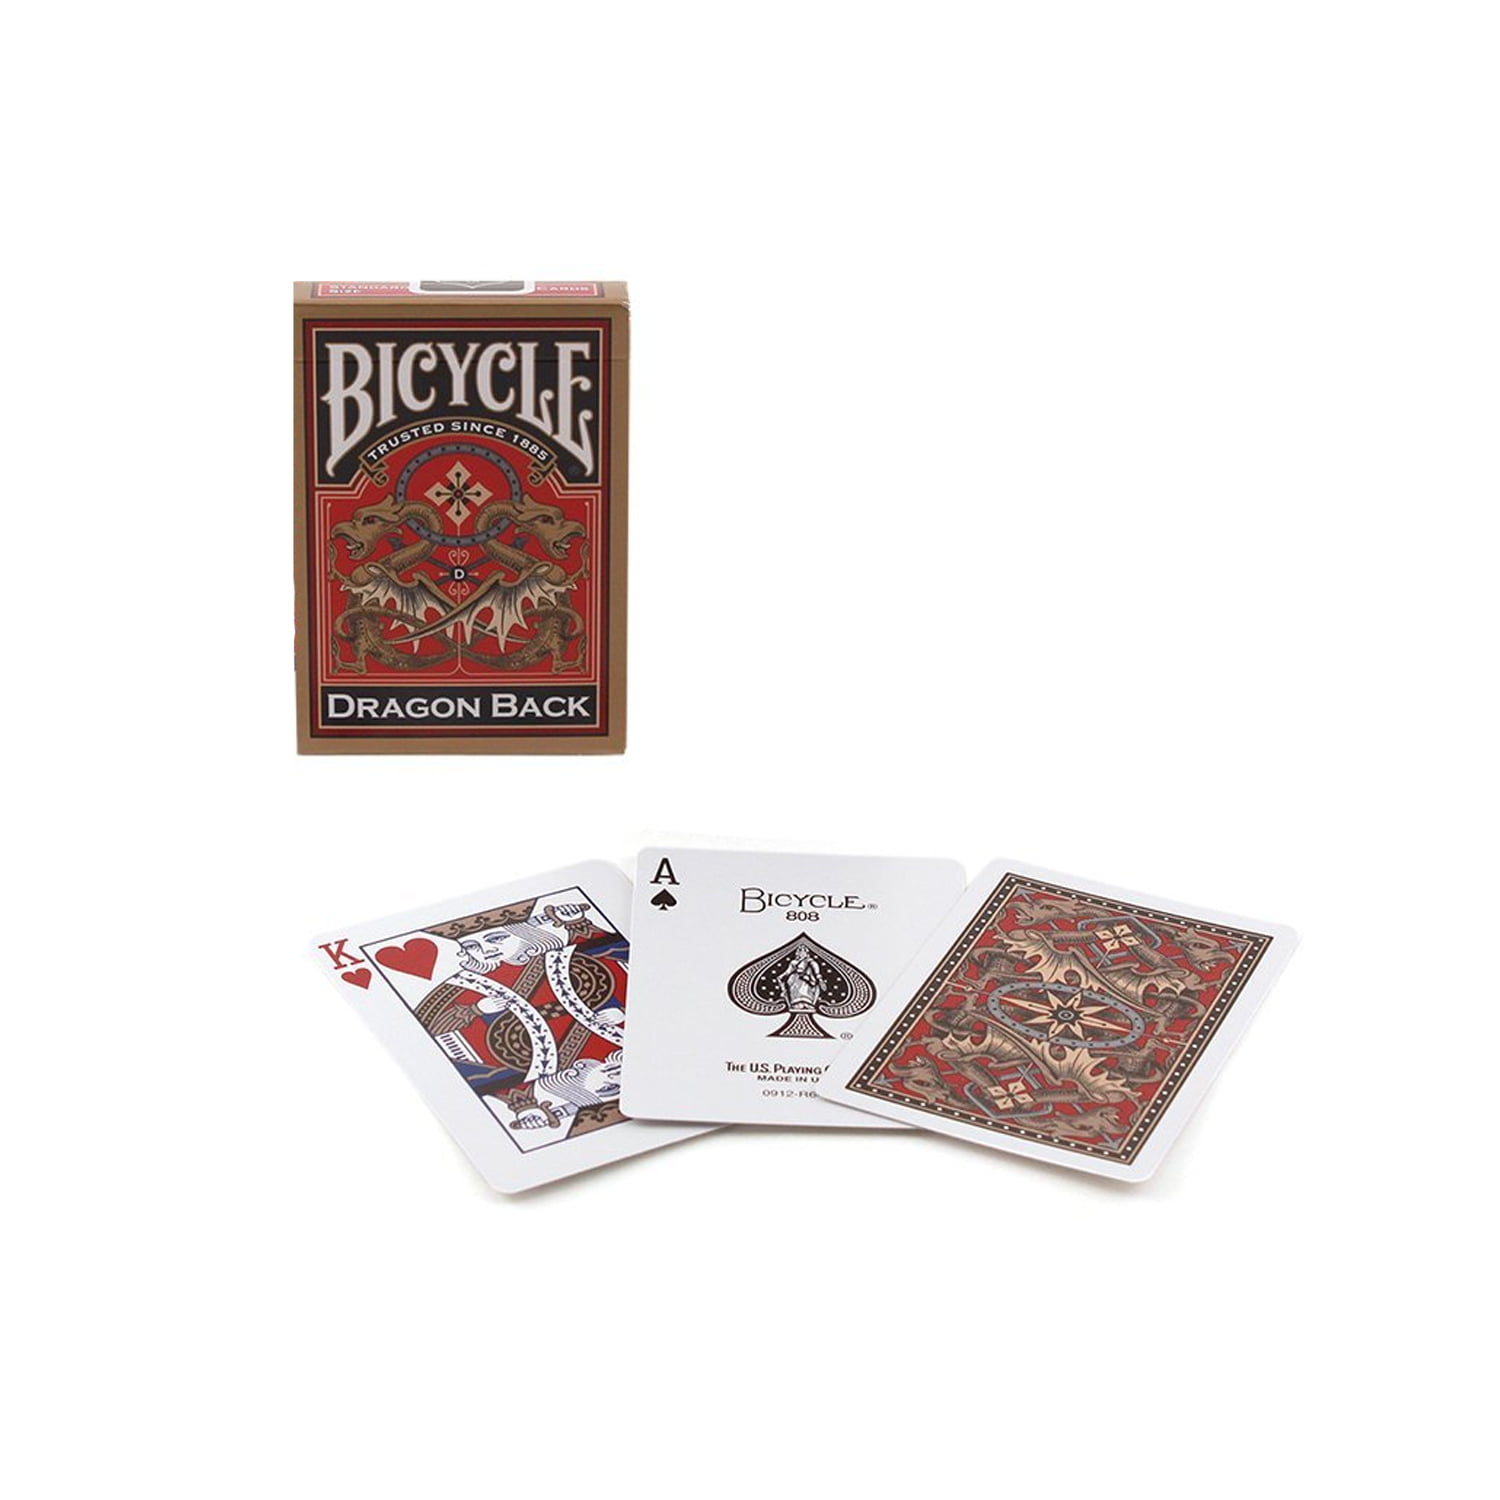 1 deck s Bicycle Gold Dragon Back Standard Index Playing Cards 